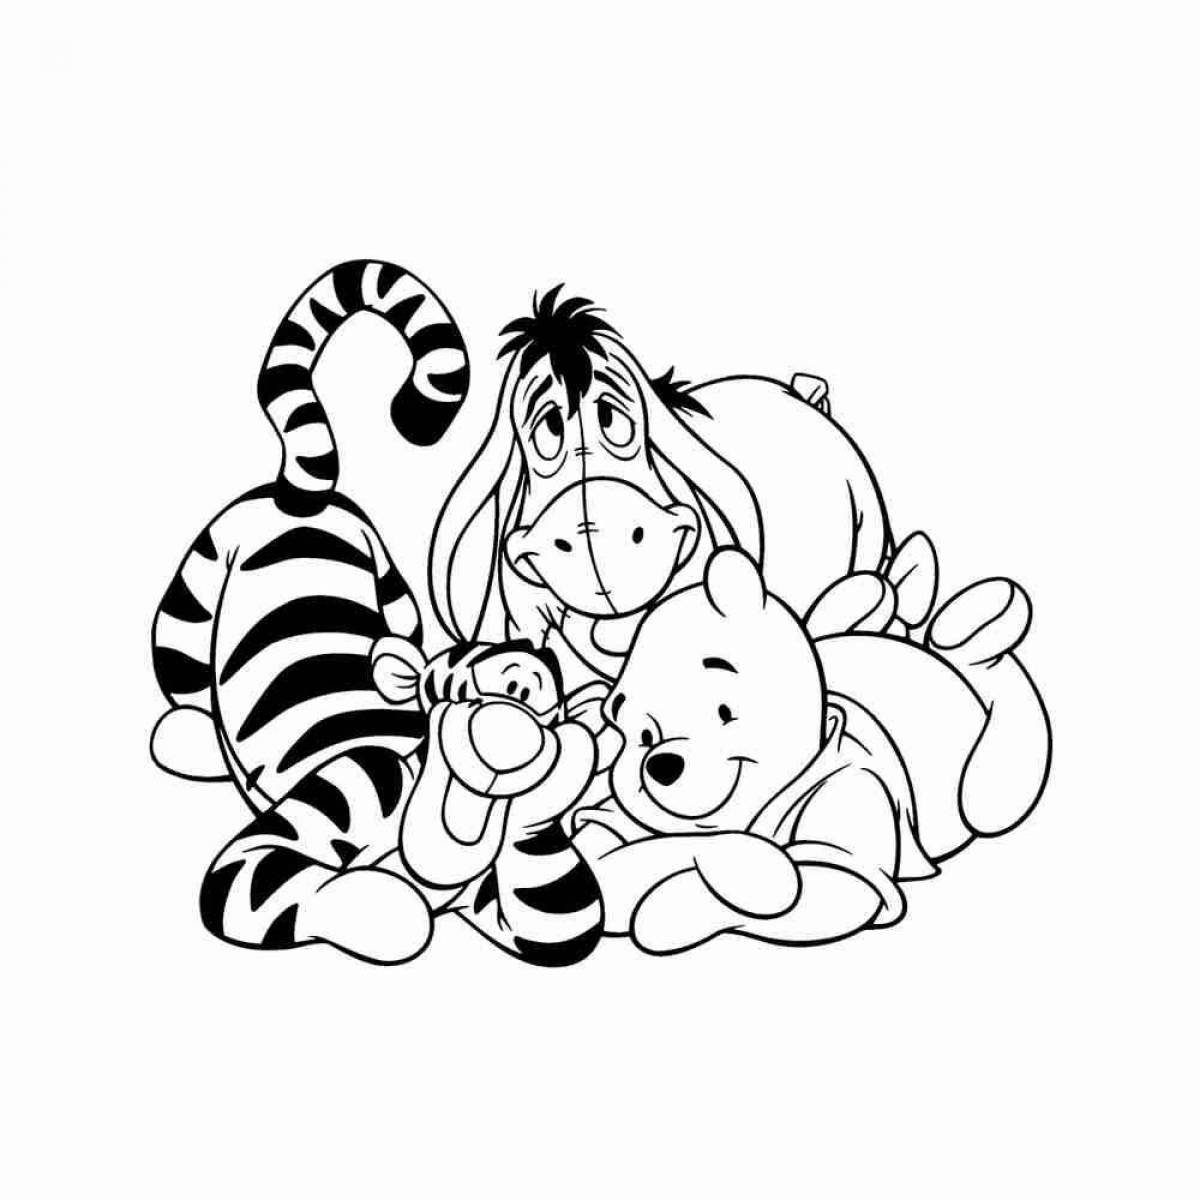 Coloring page charming winnie the pooh